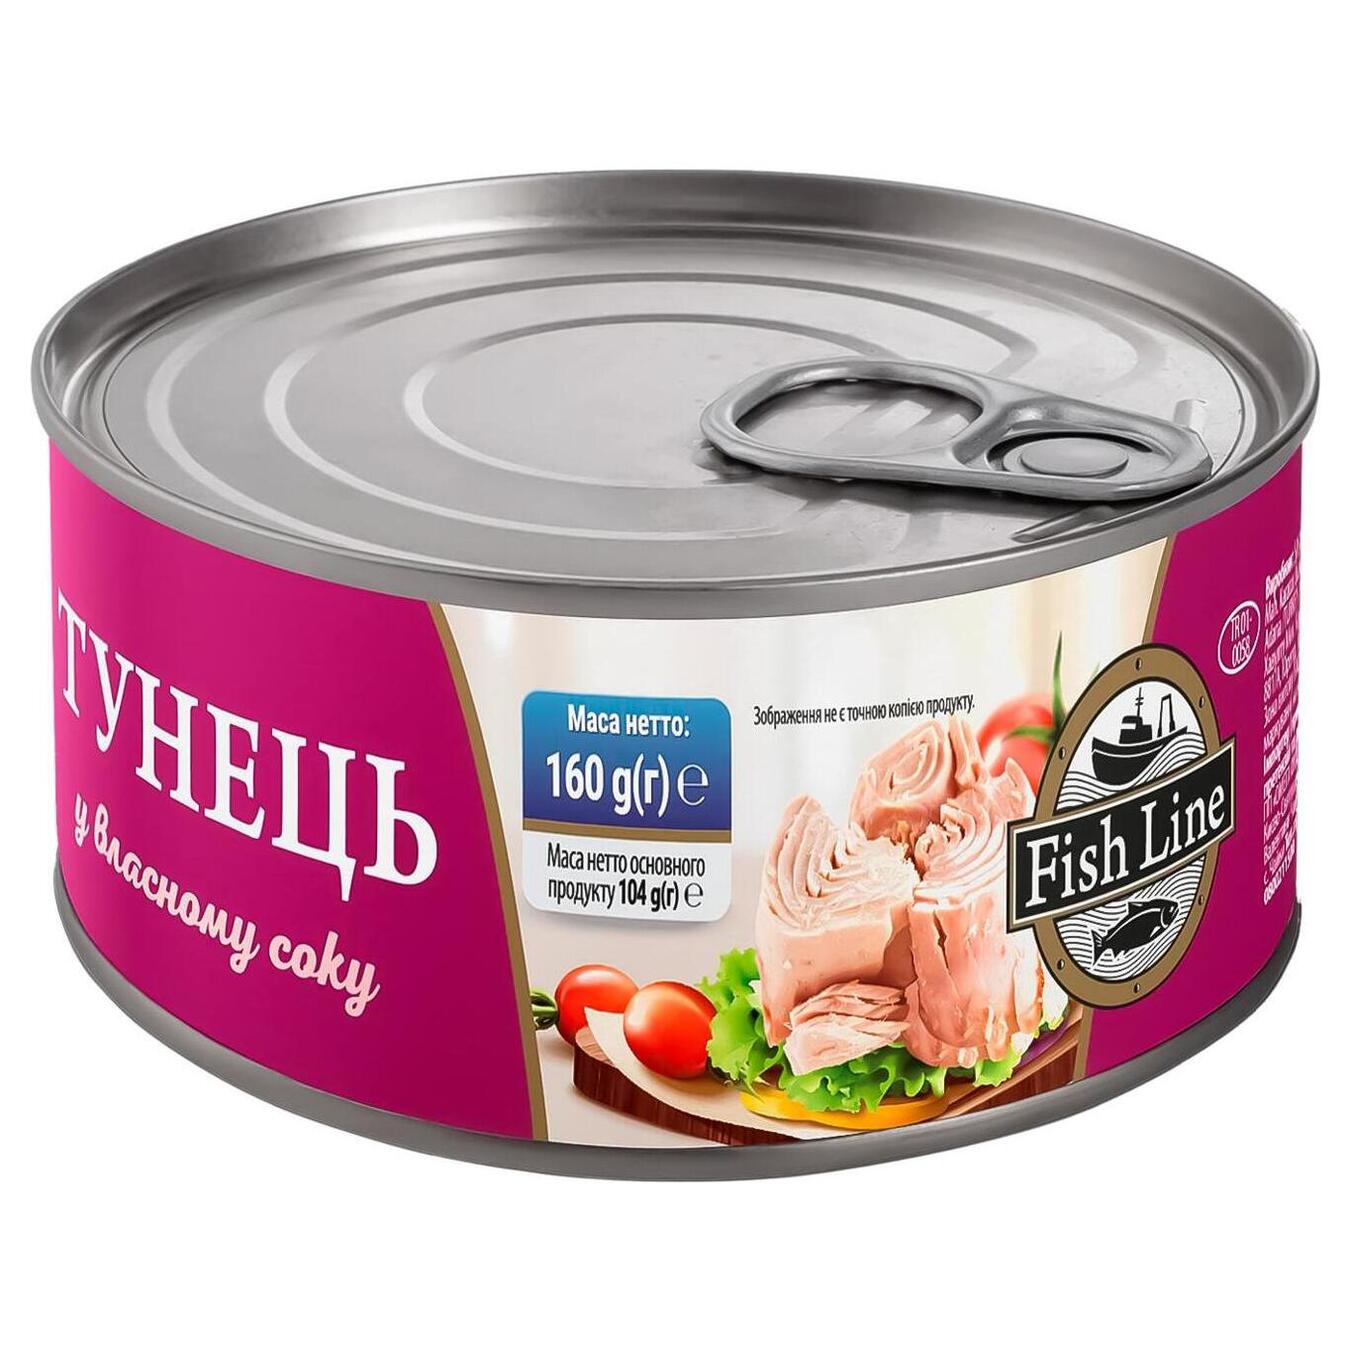 Fish Line tuna in its own juice 160g